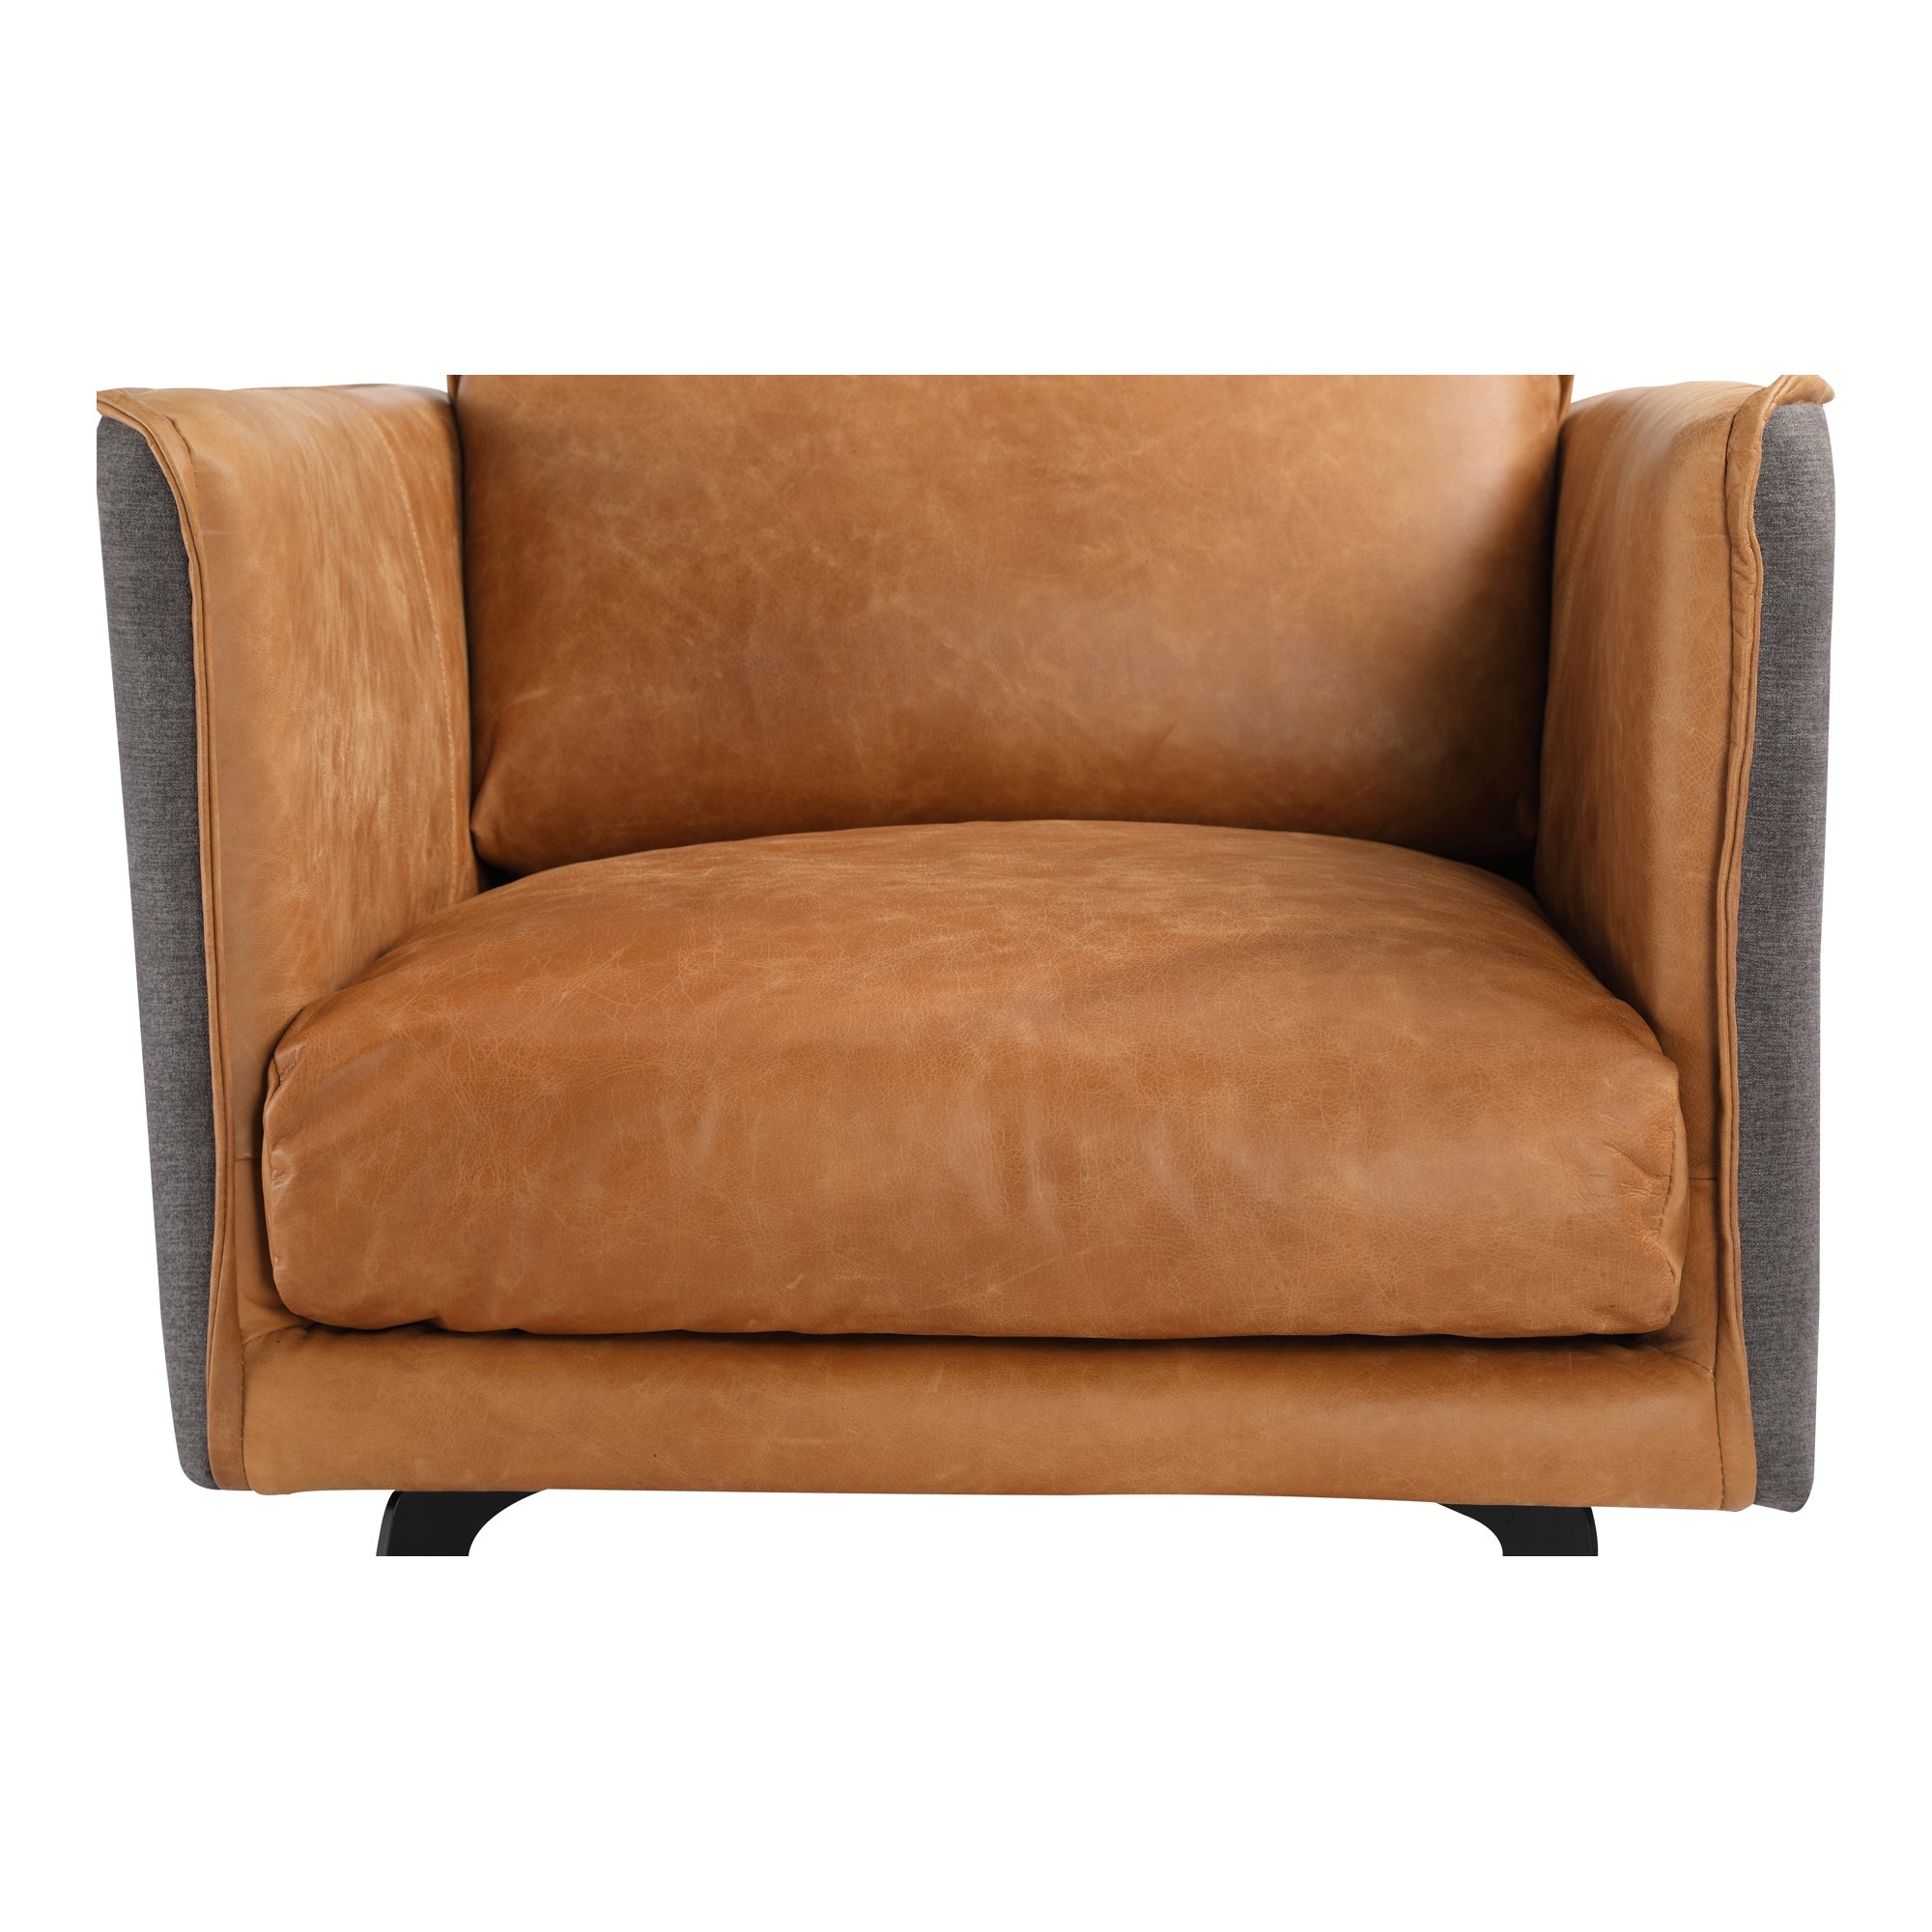 Messina Leather Arm Chair Cognac - Furniture - Tipplergoods